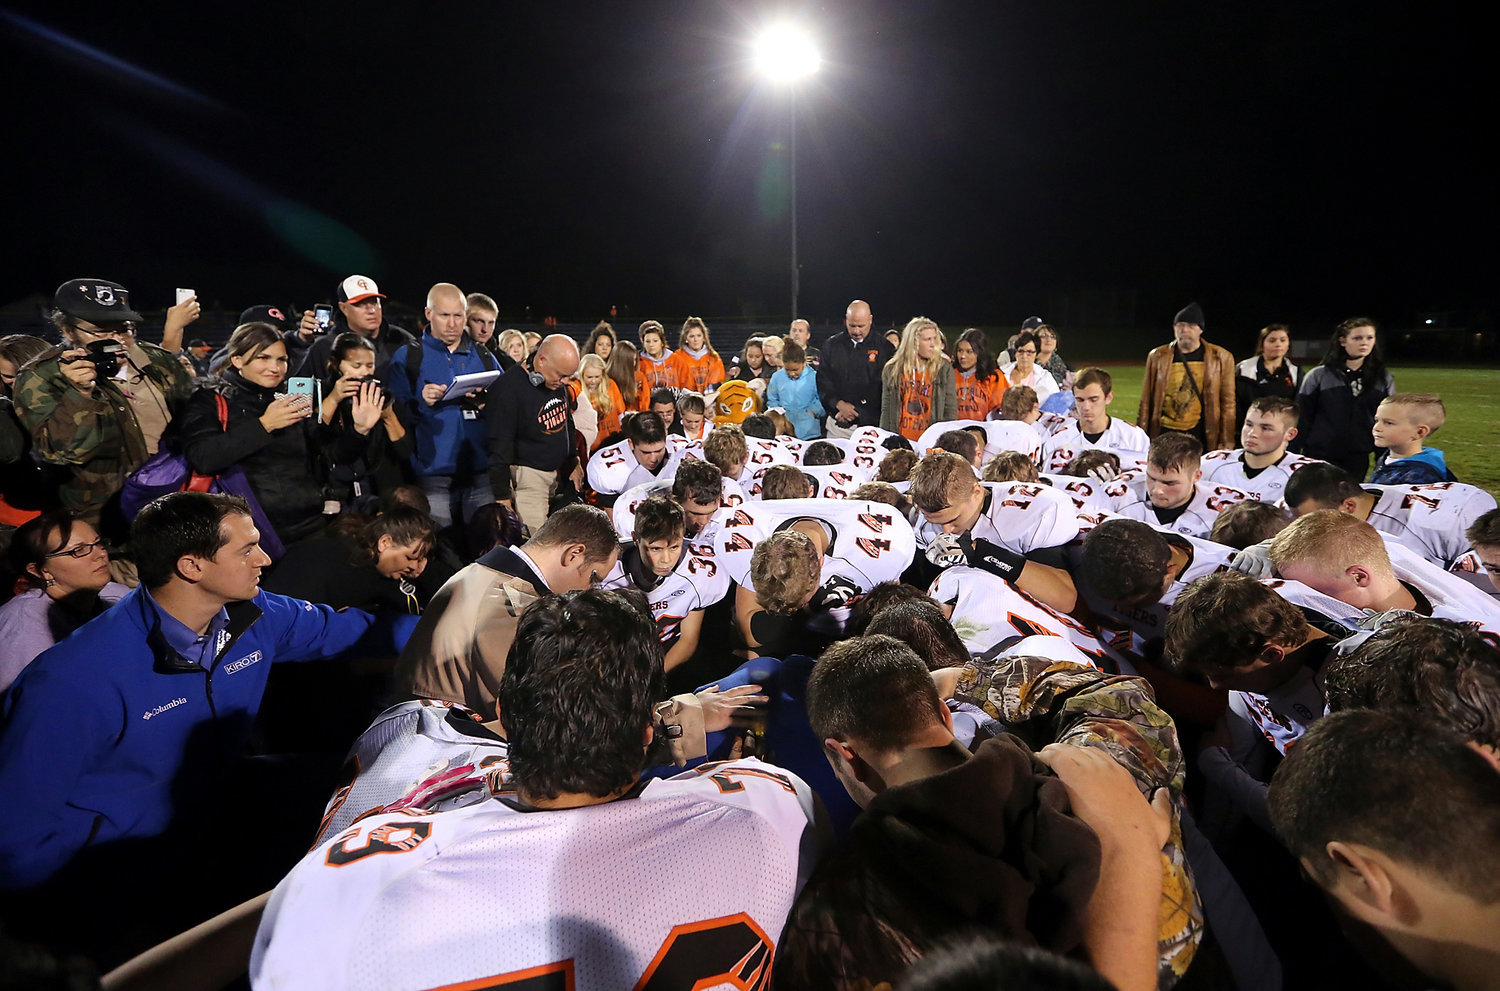 In this Friday, Oct. 16, 2015, photo, Bremerton assistant football coach Joe Kennedy, obscured at center in blue,  is surrounded by Centralia players after they took a knee with him and prayed after their game against Bremerton, in Bremerton, Wash. The Washington coach who was told by district officials to stop leading prayers after games went ahead with a prayer at the 50-yard line after a weekend game. (Meegan M. Reid/Kitsap Sun via AP)